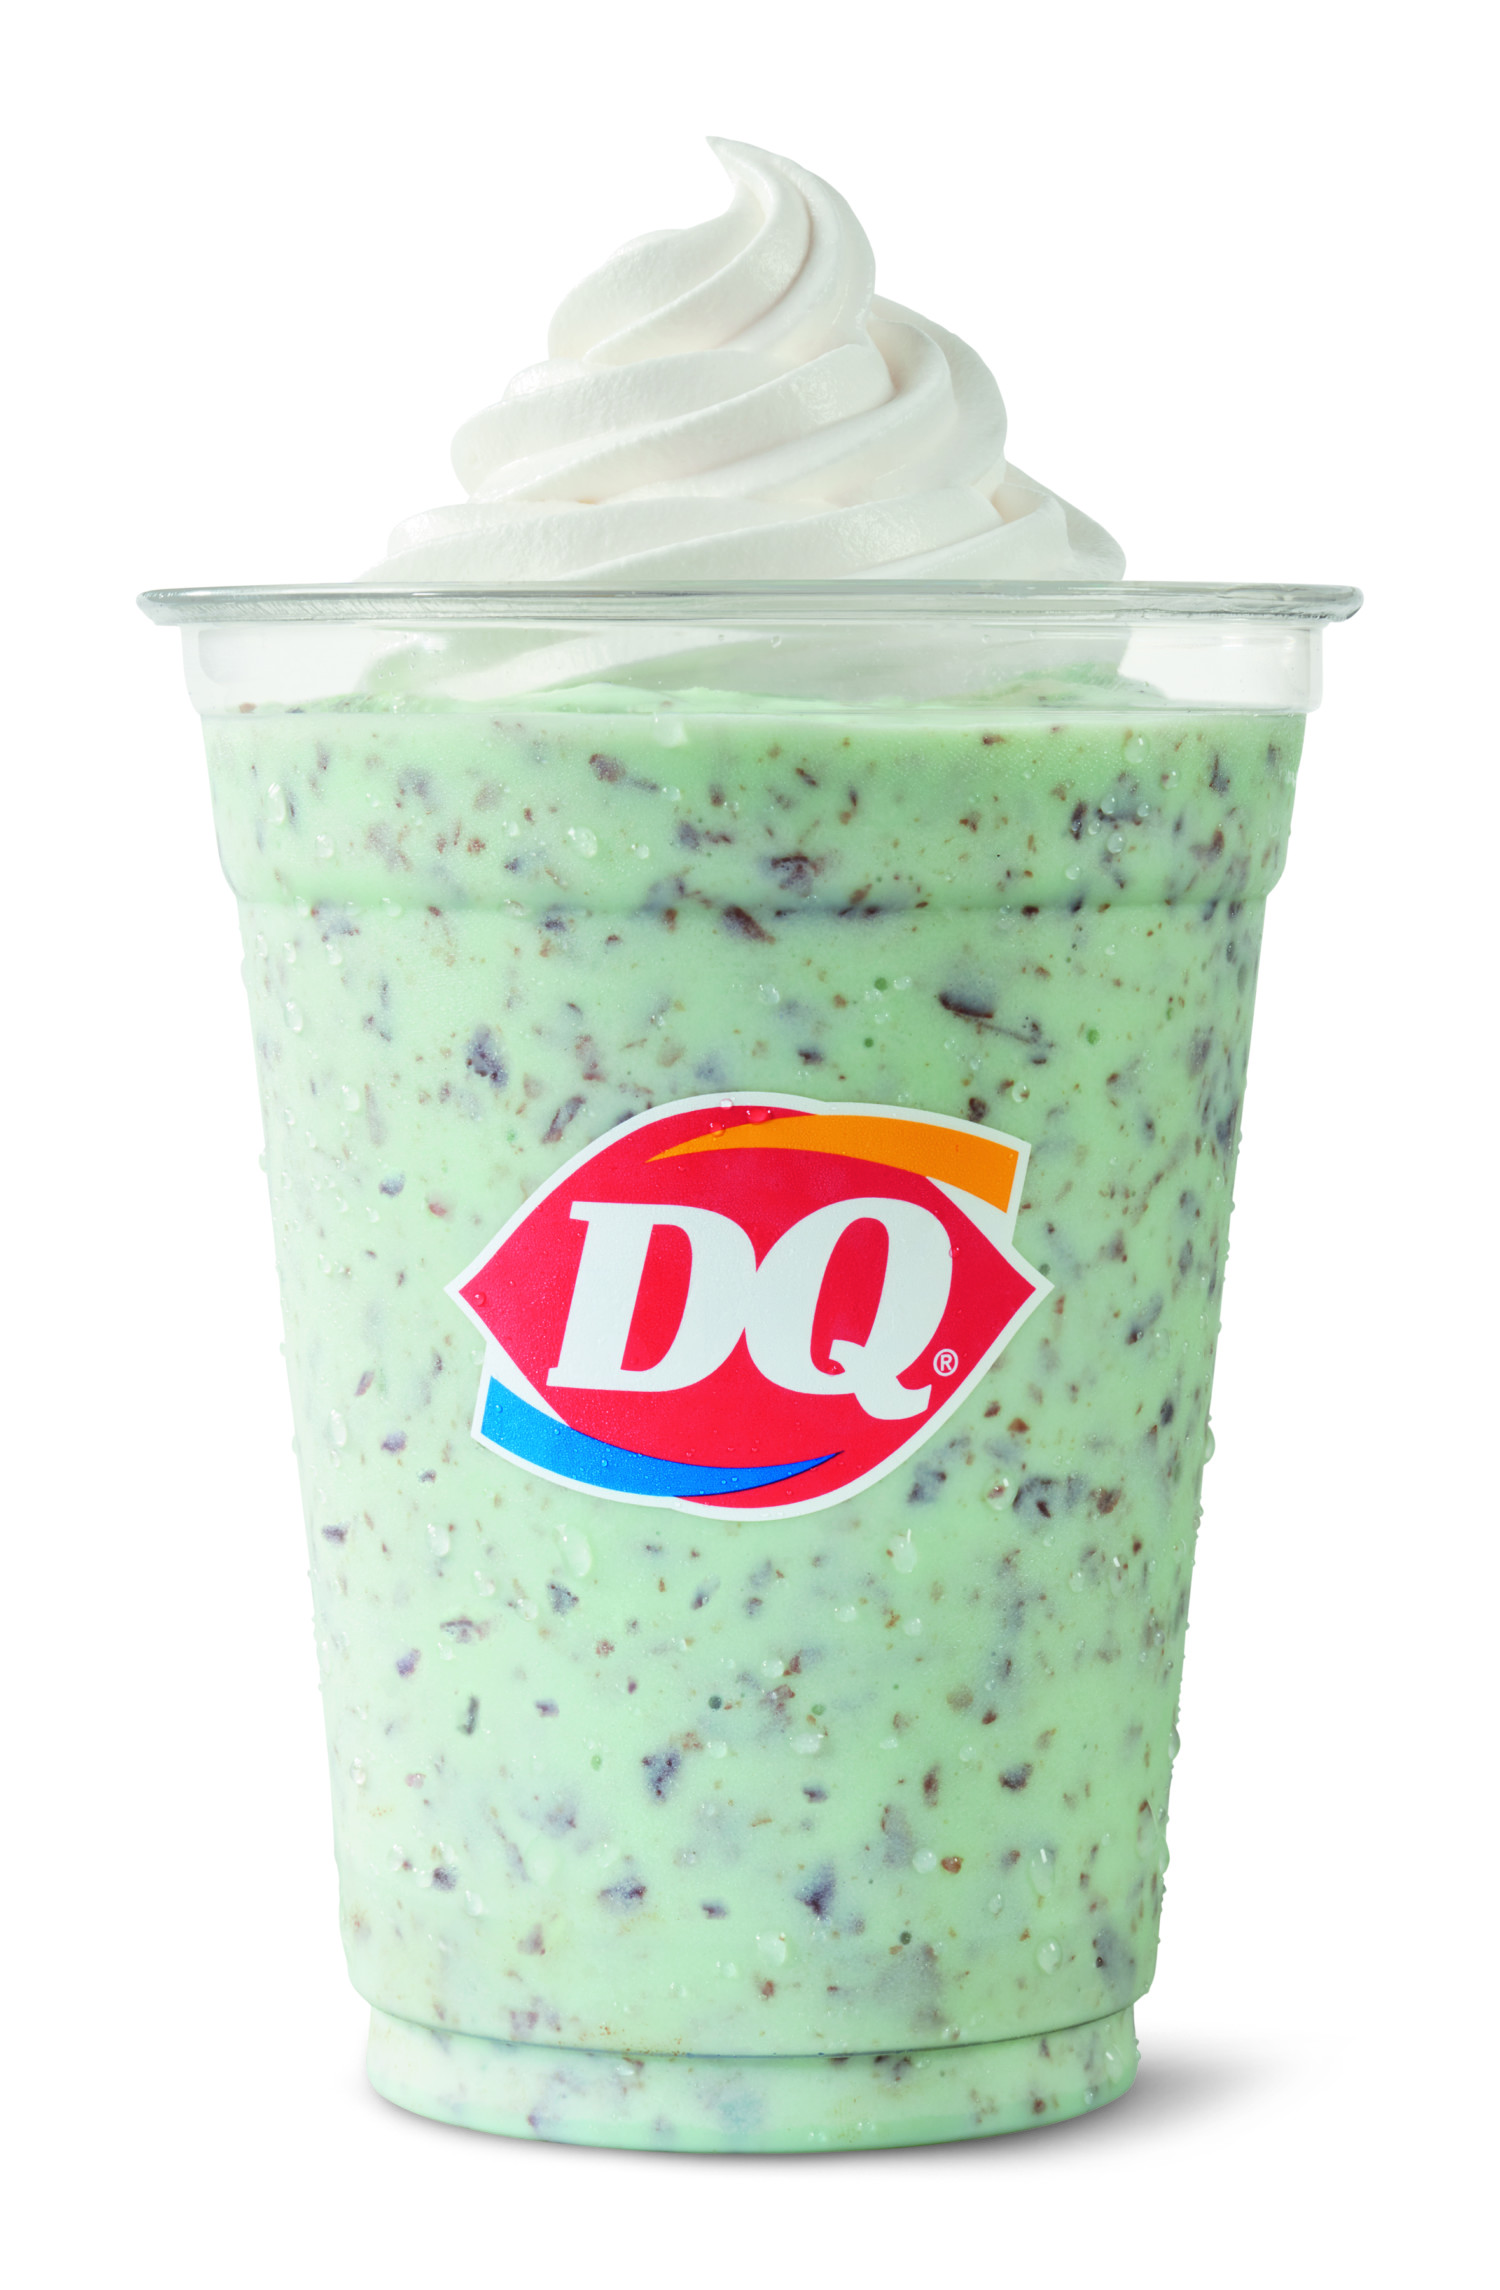 Dairy Queen's mint chip shake